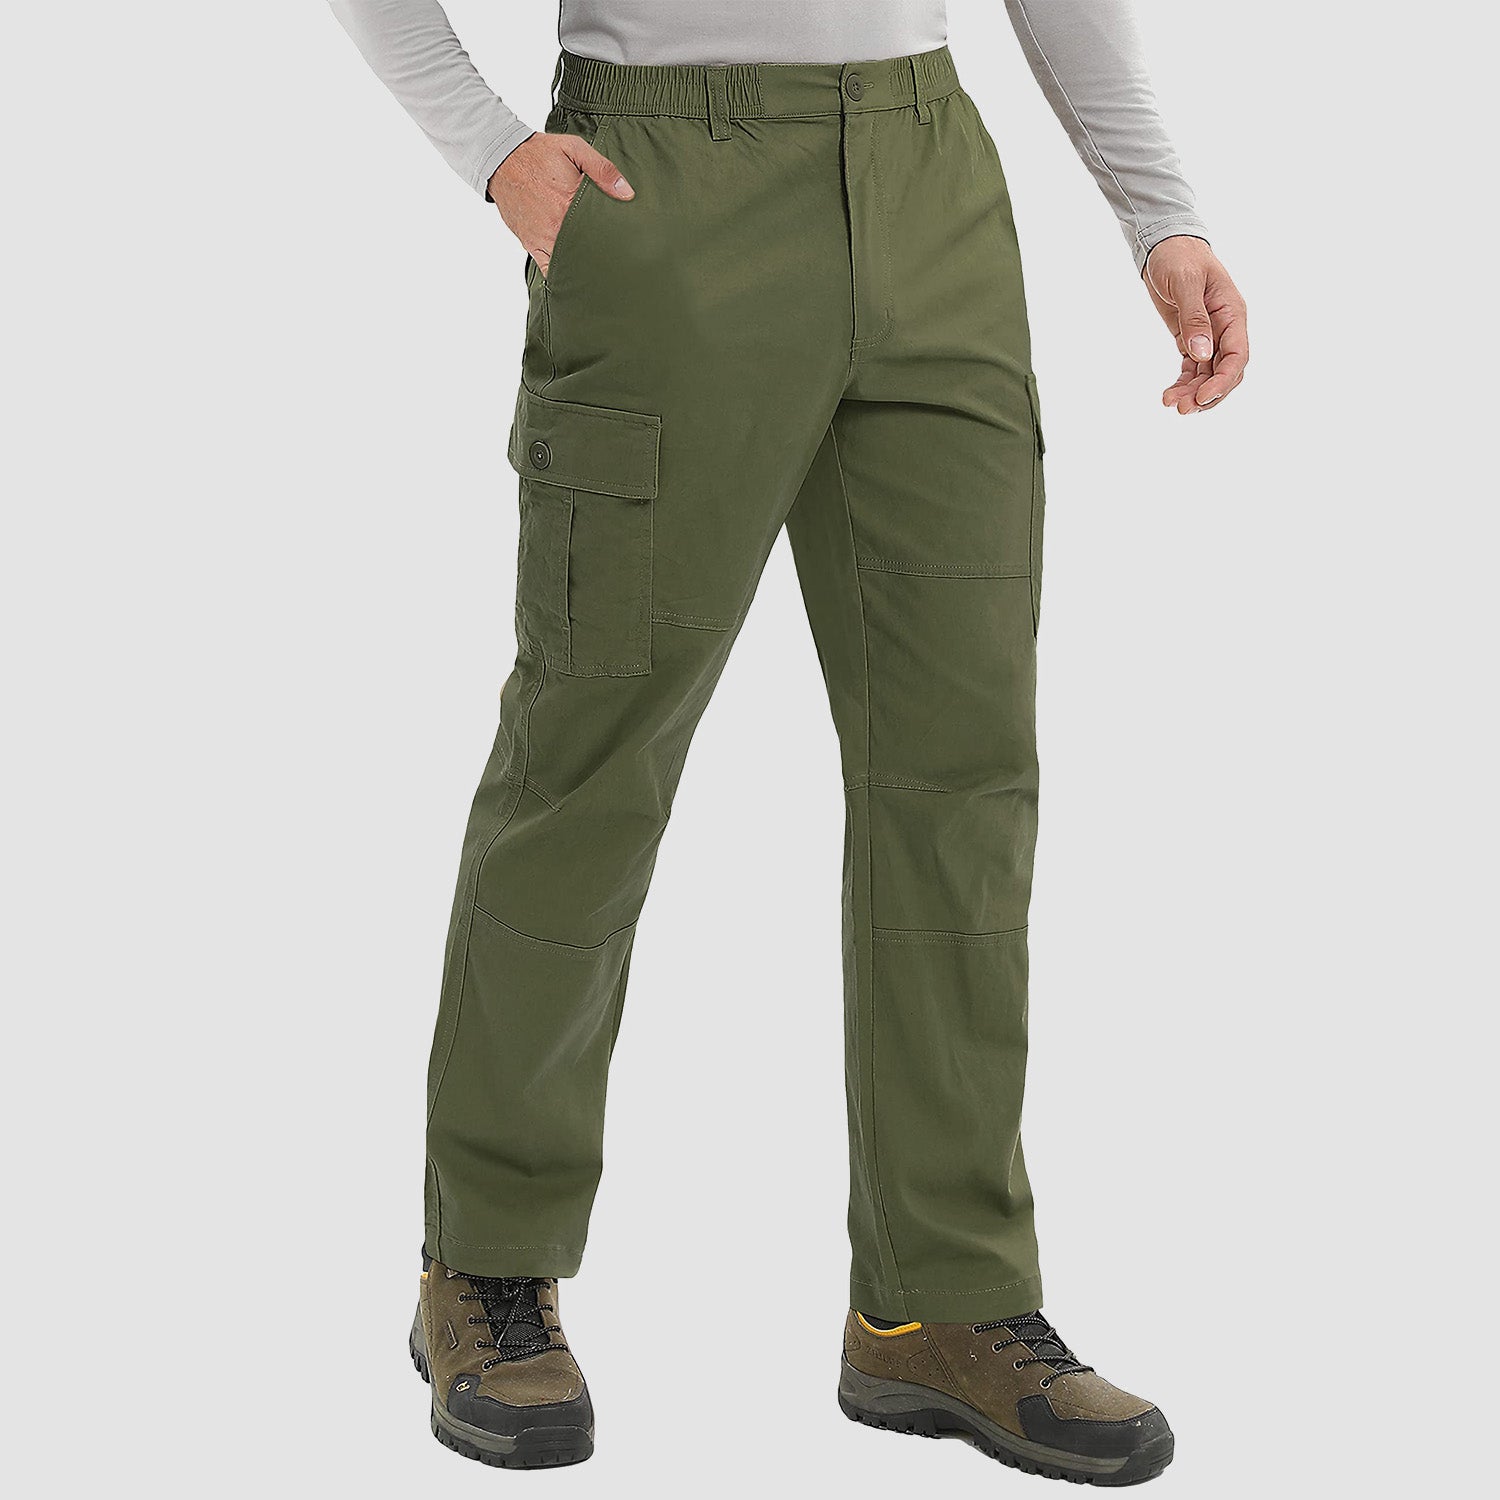 Men's Outdoor Cargo Pants Straight Fit with 6 Pockets Elastic Waist Fishing Travel Work Pants